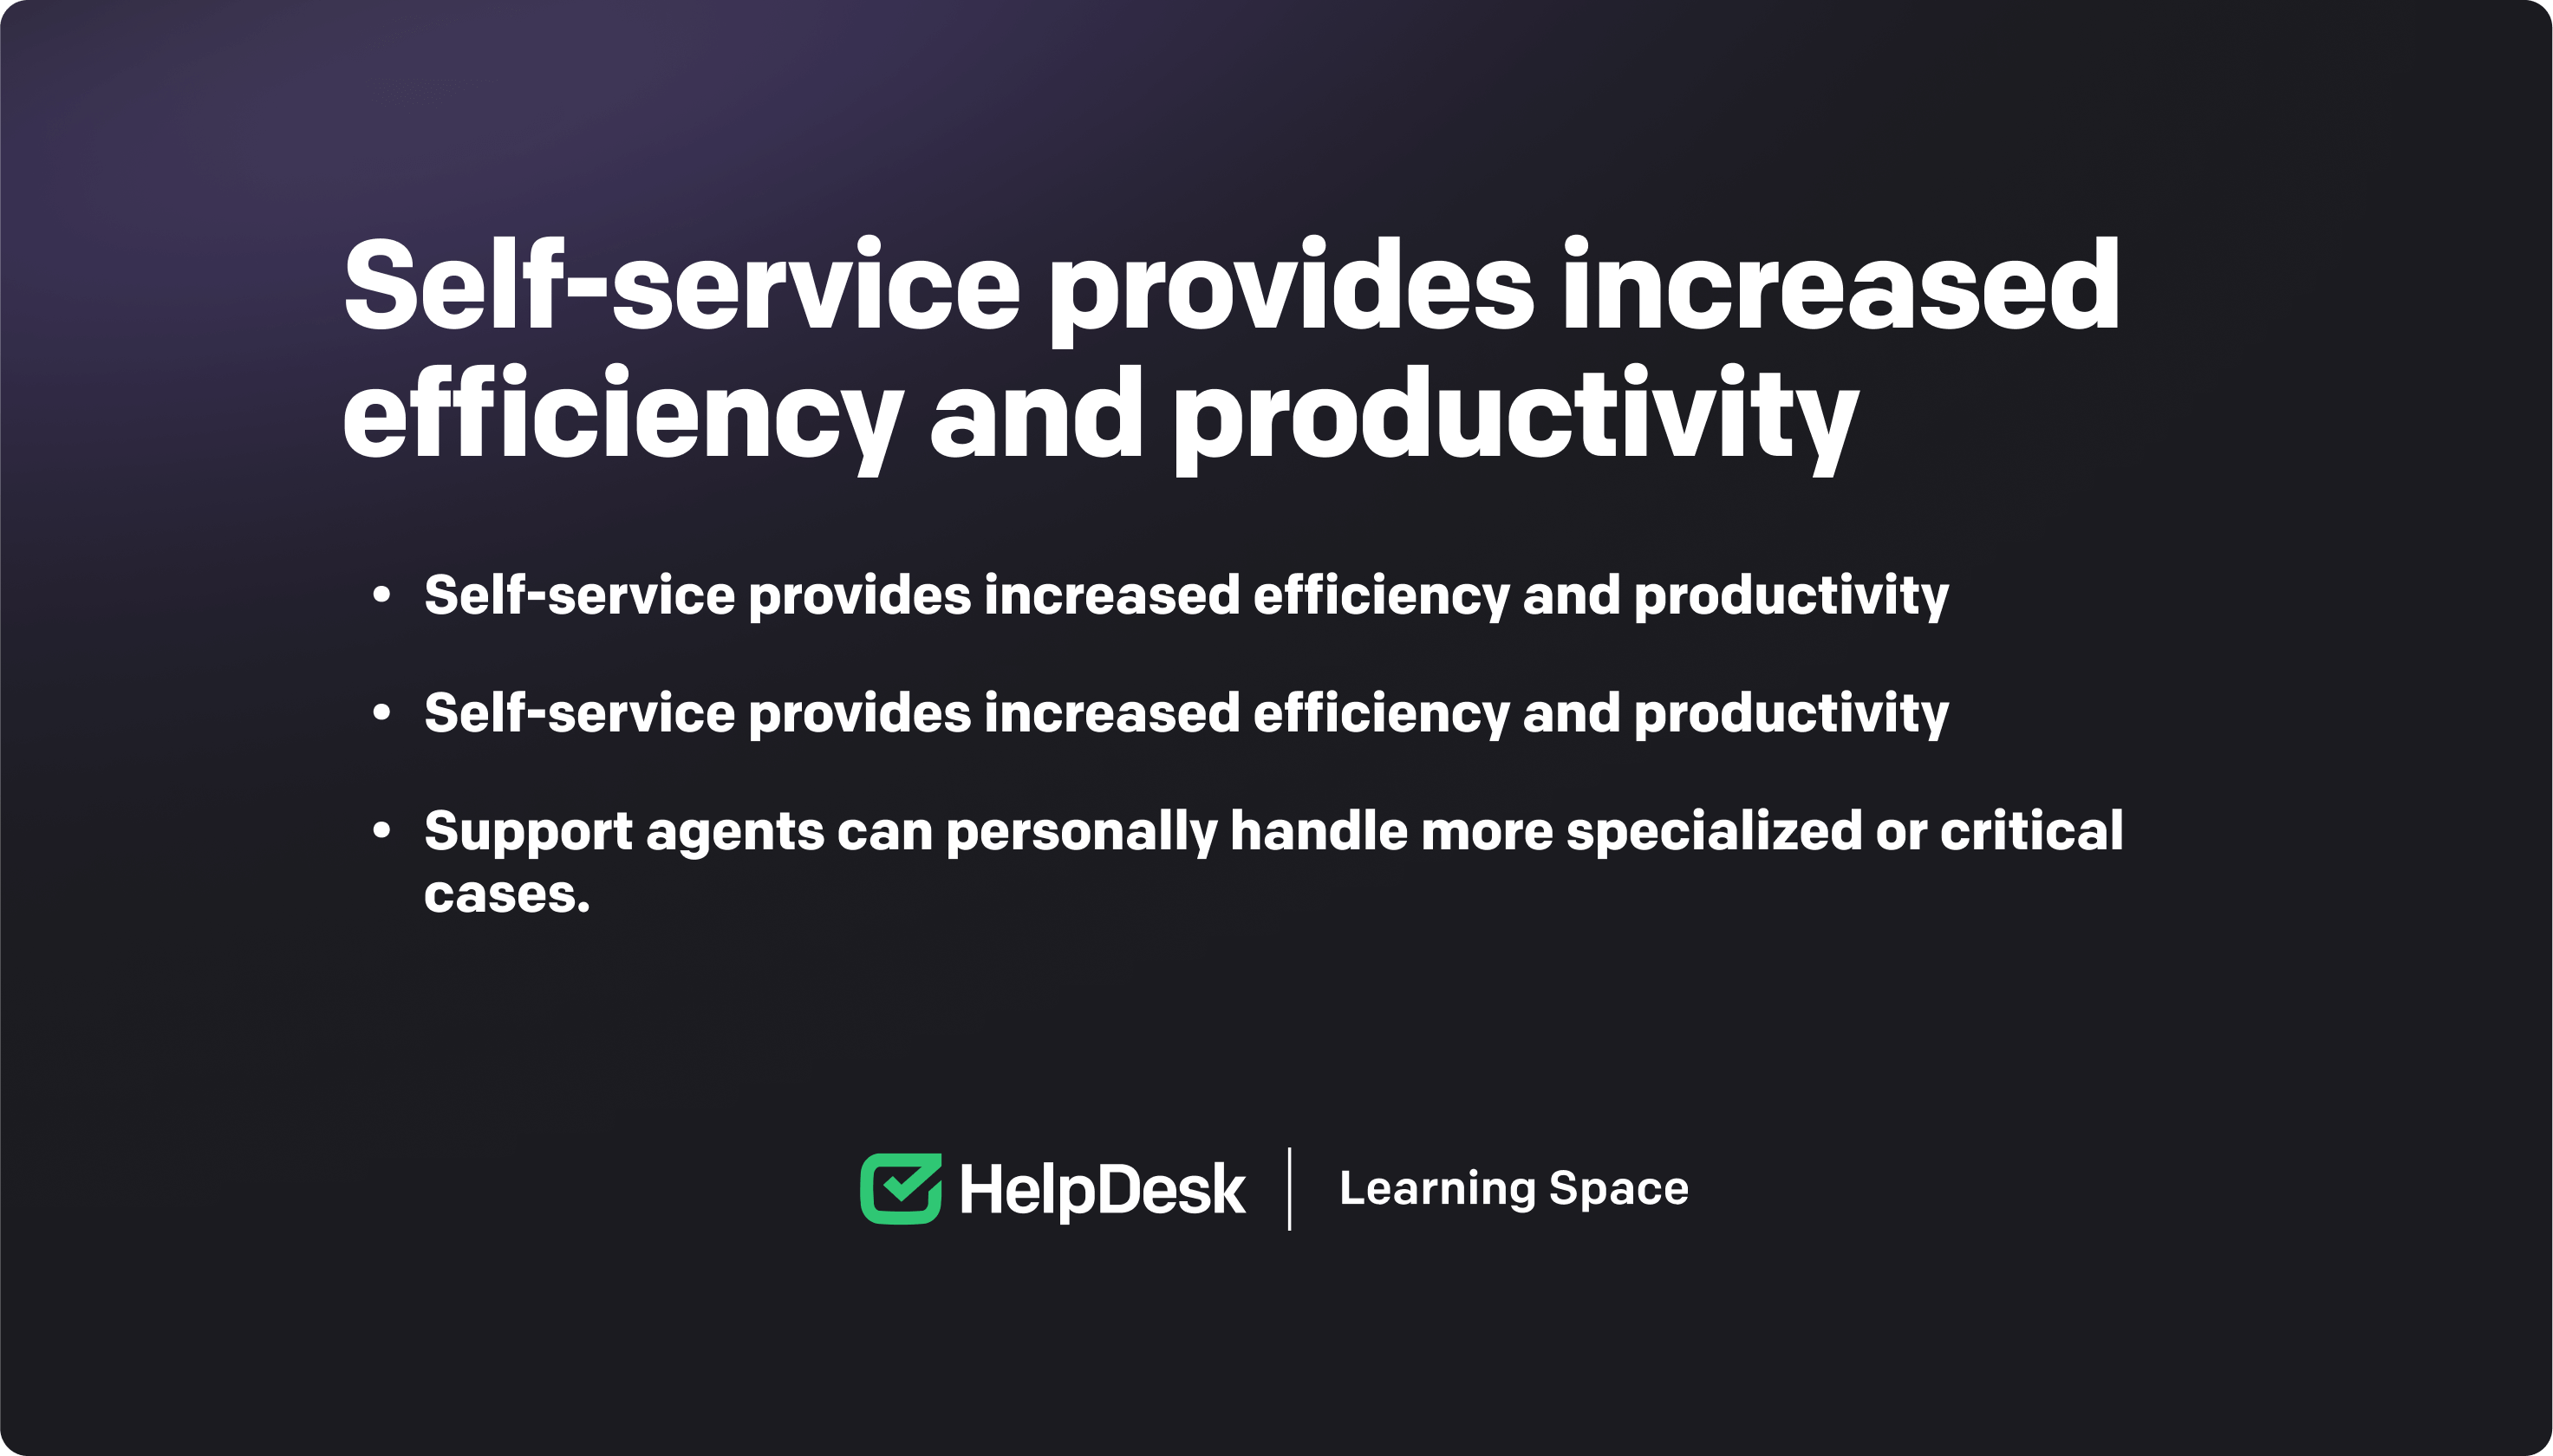 Self-service benefits for support teams: increased efficiency and productivity.